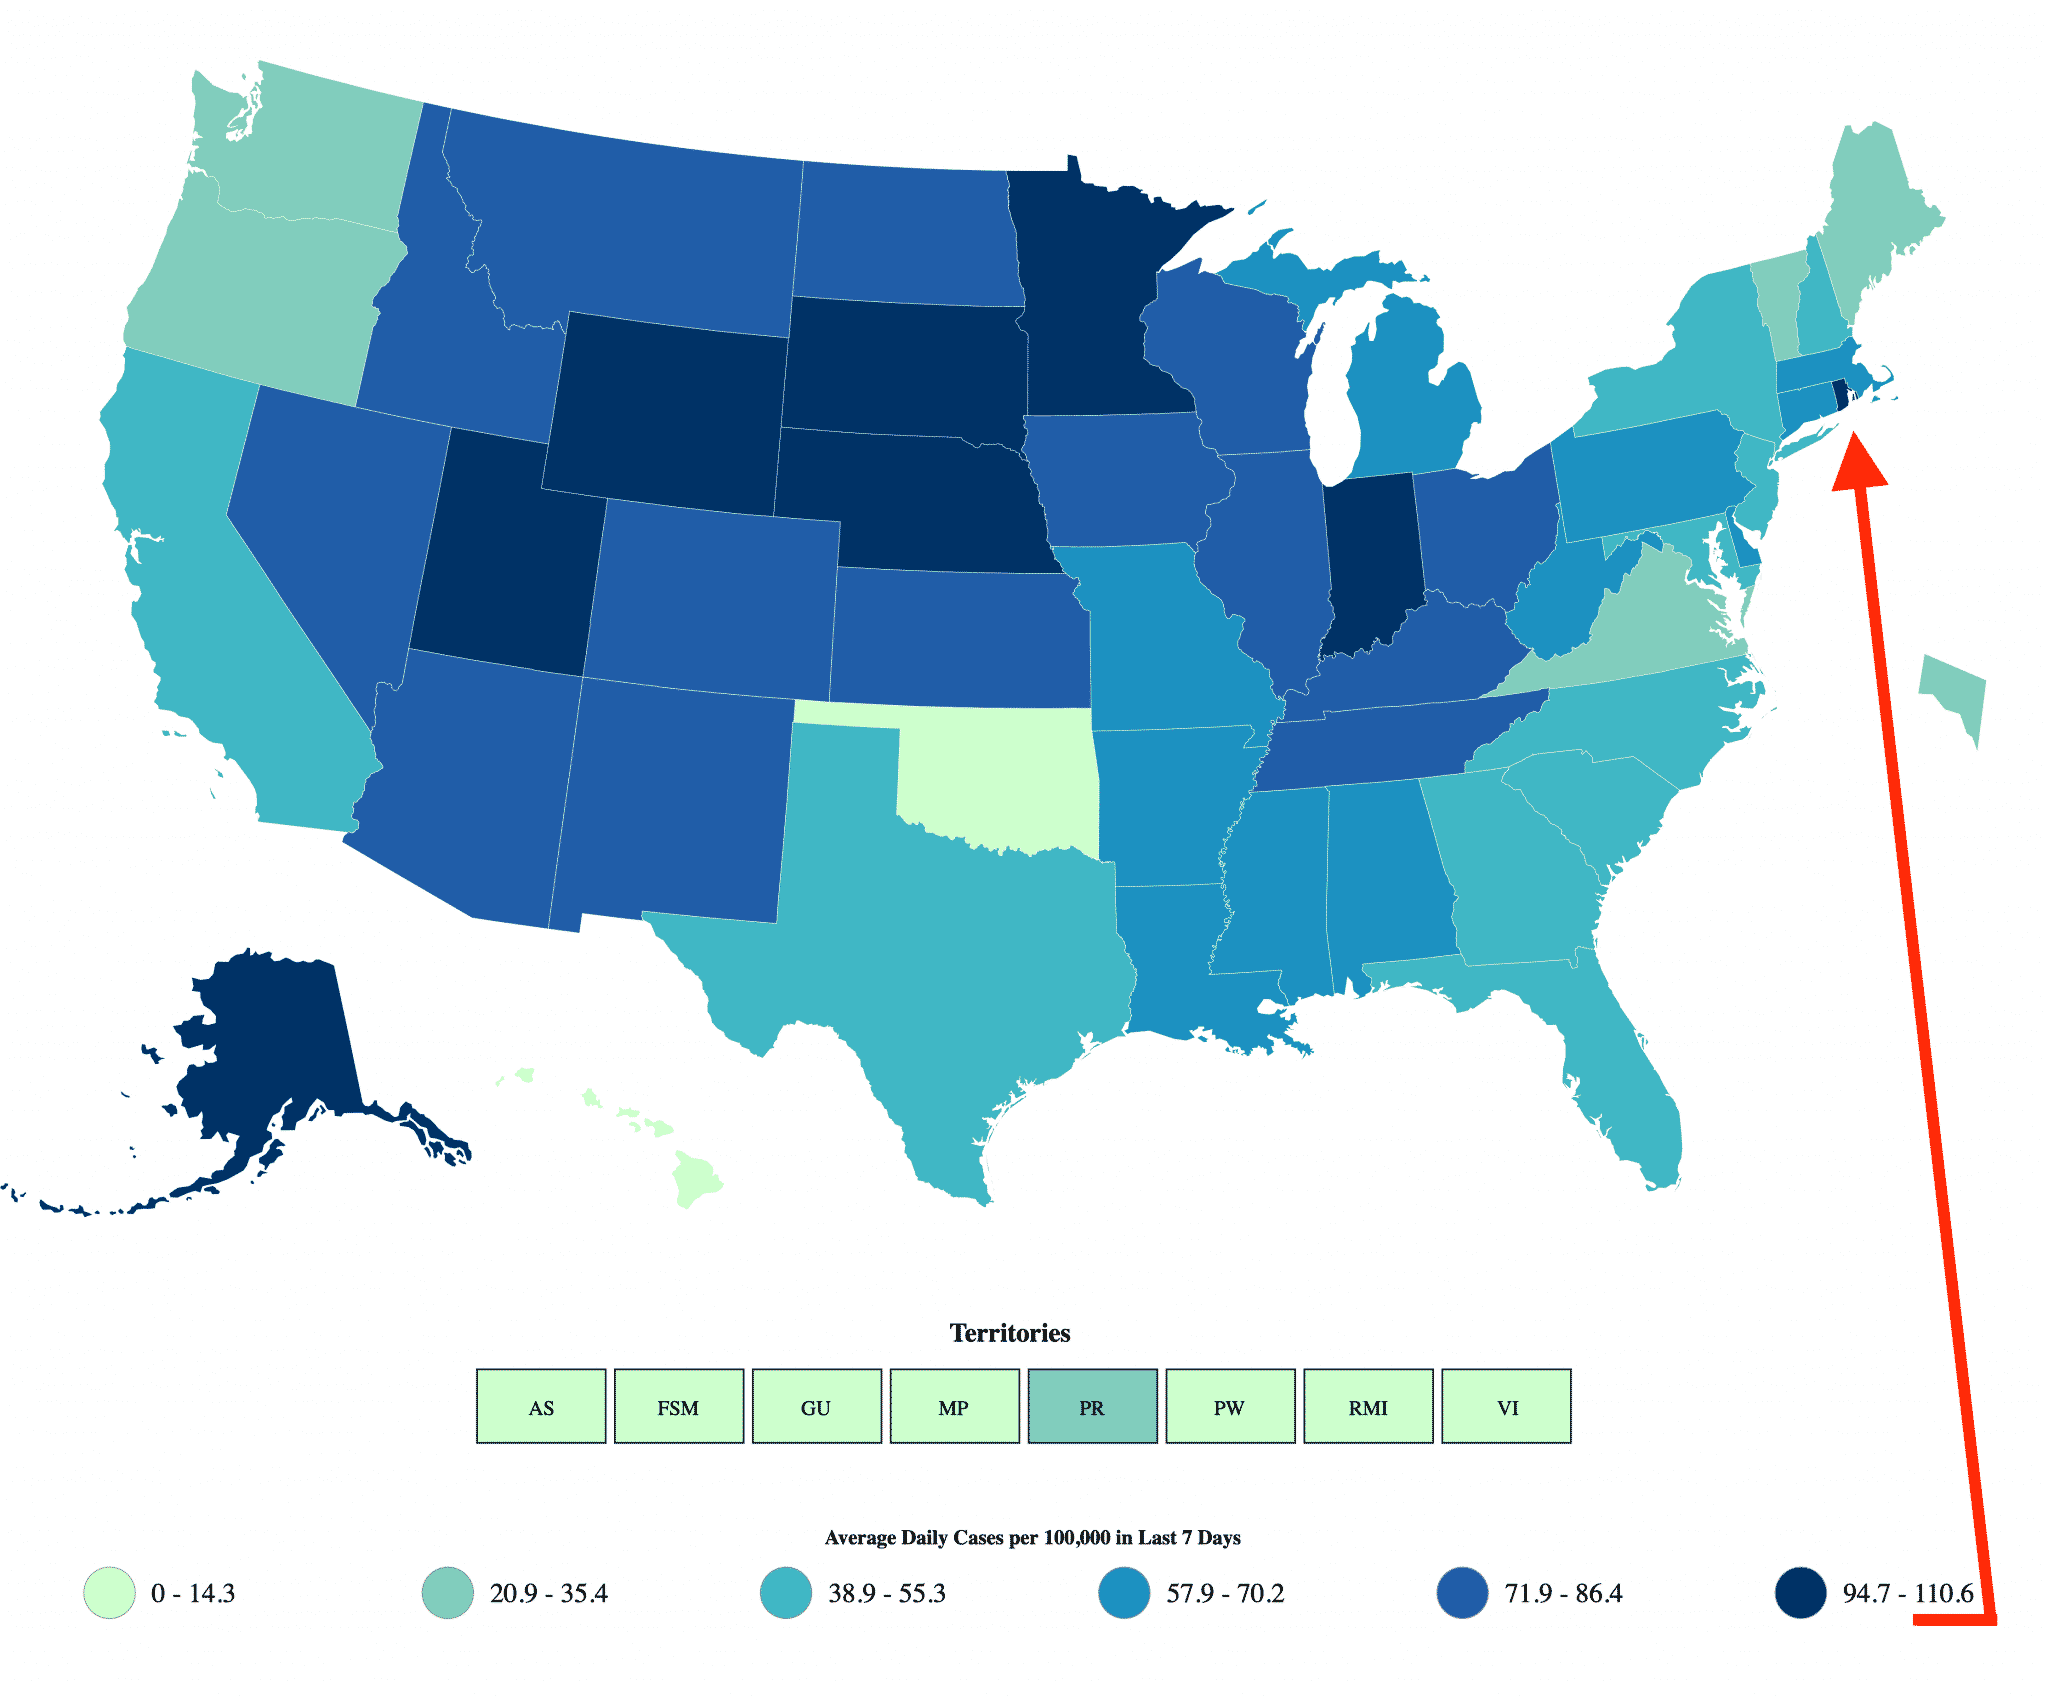 [CREDIT:CDC] Rhode Island has the highest per capita rate of COVID-19 cases in the United States.